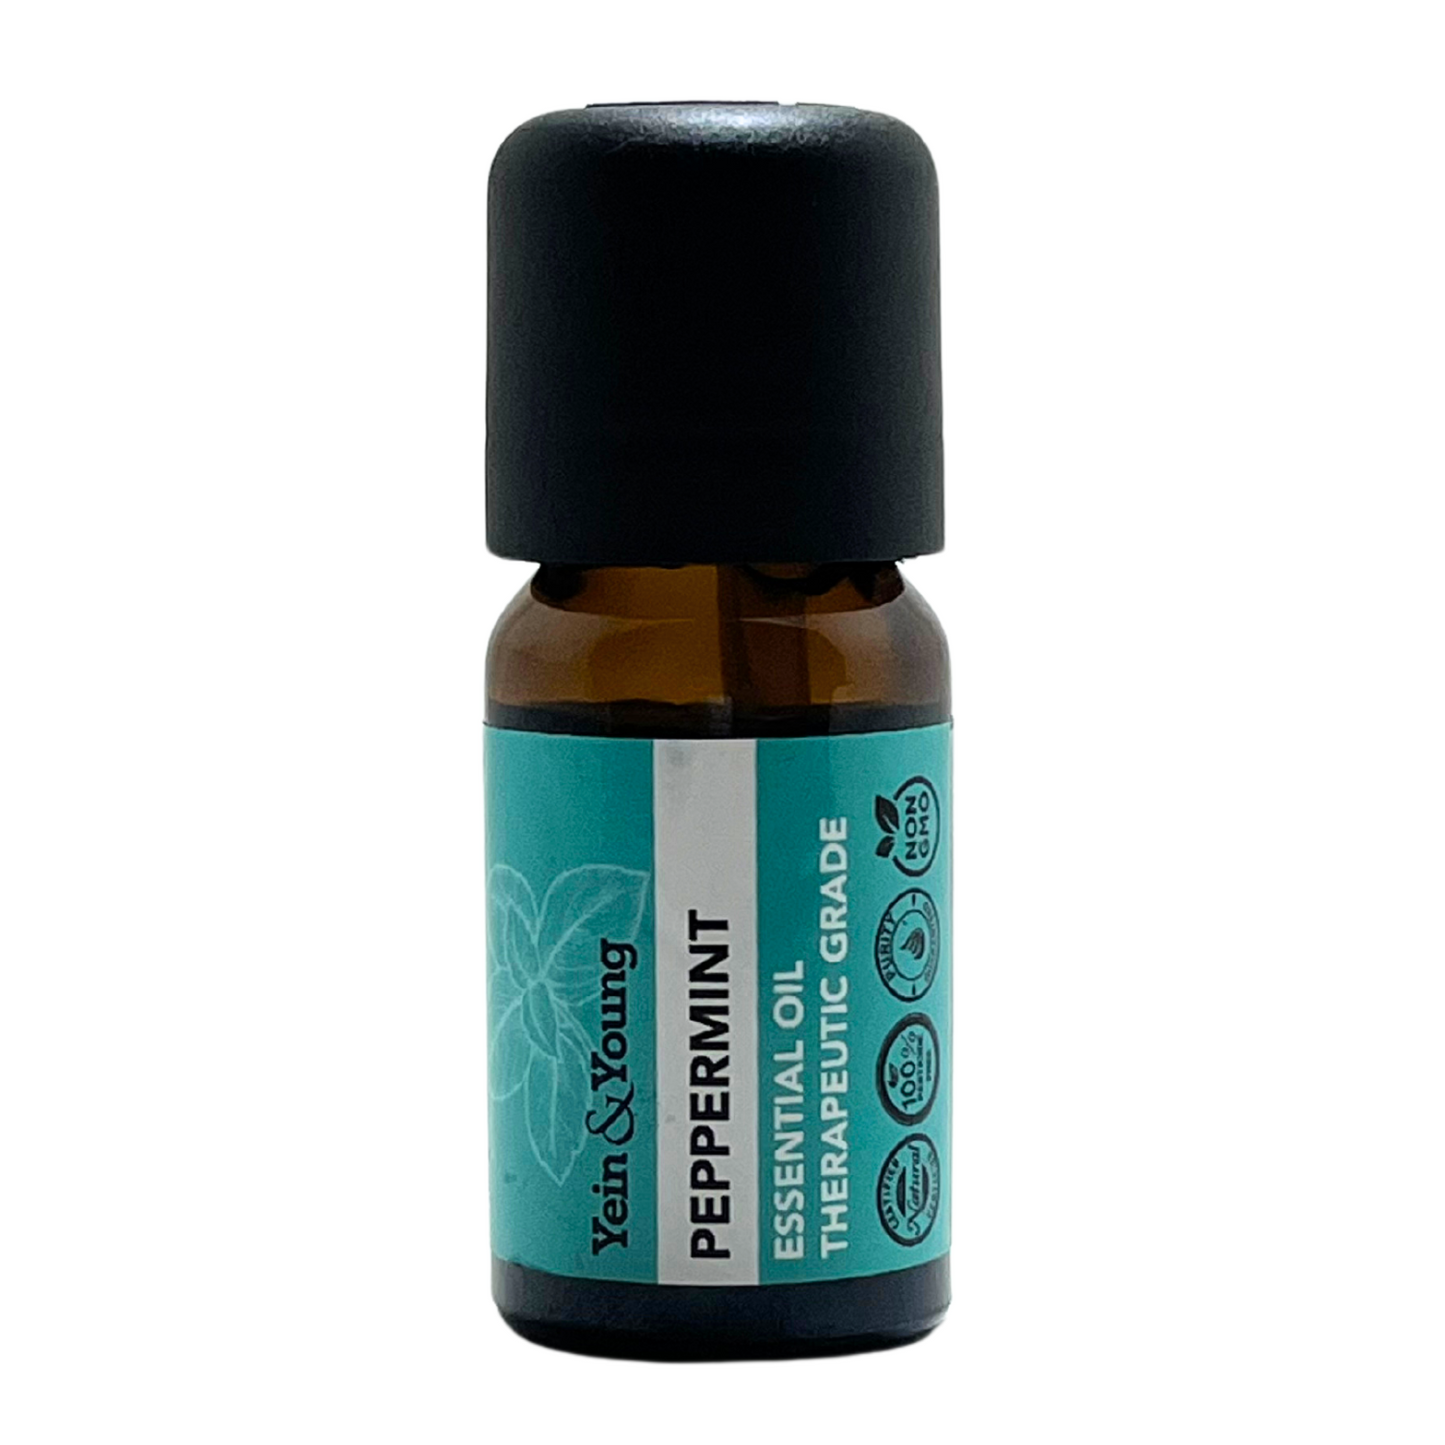 Yein&Young Peppermint Essential Oil - 10ml - Buy 4 pay for 2 ( terms apply )